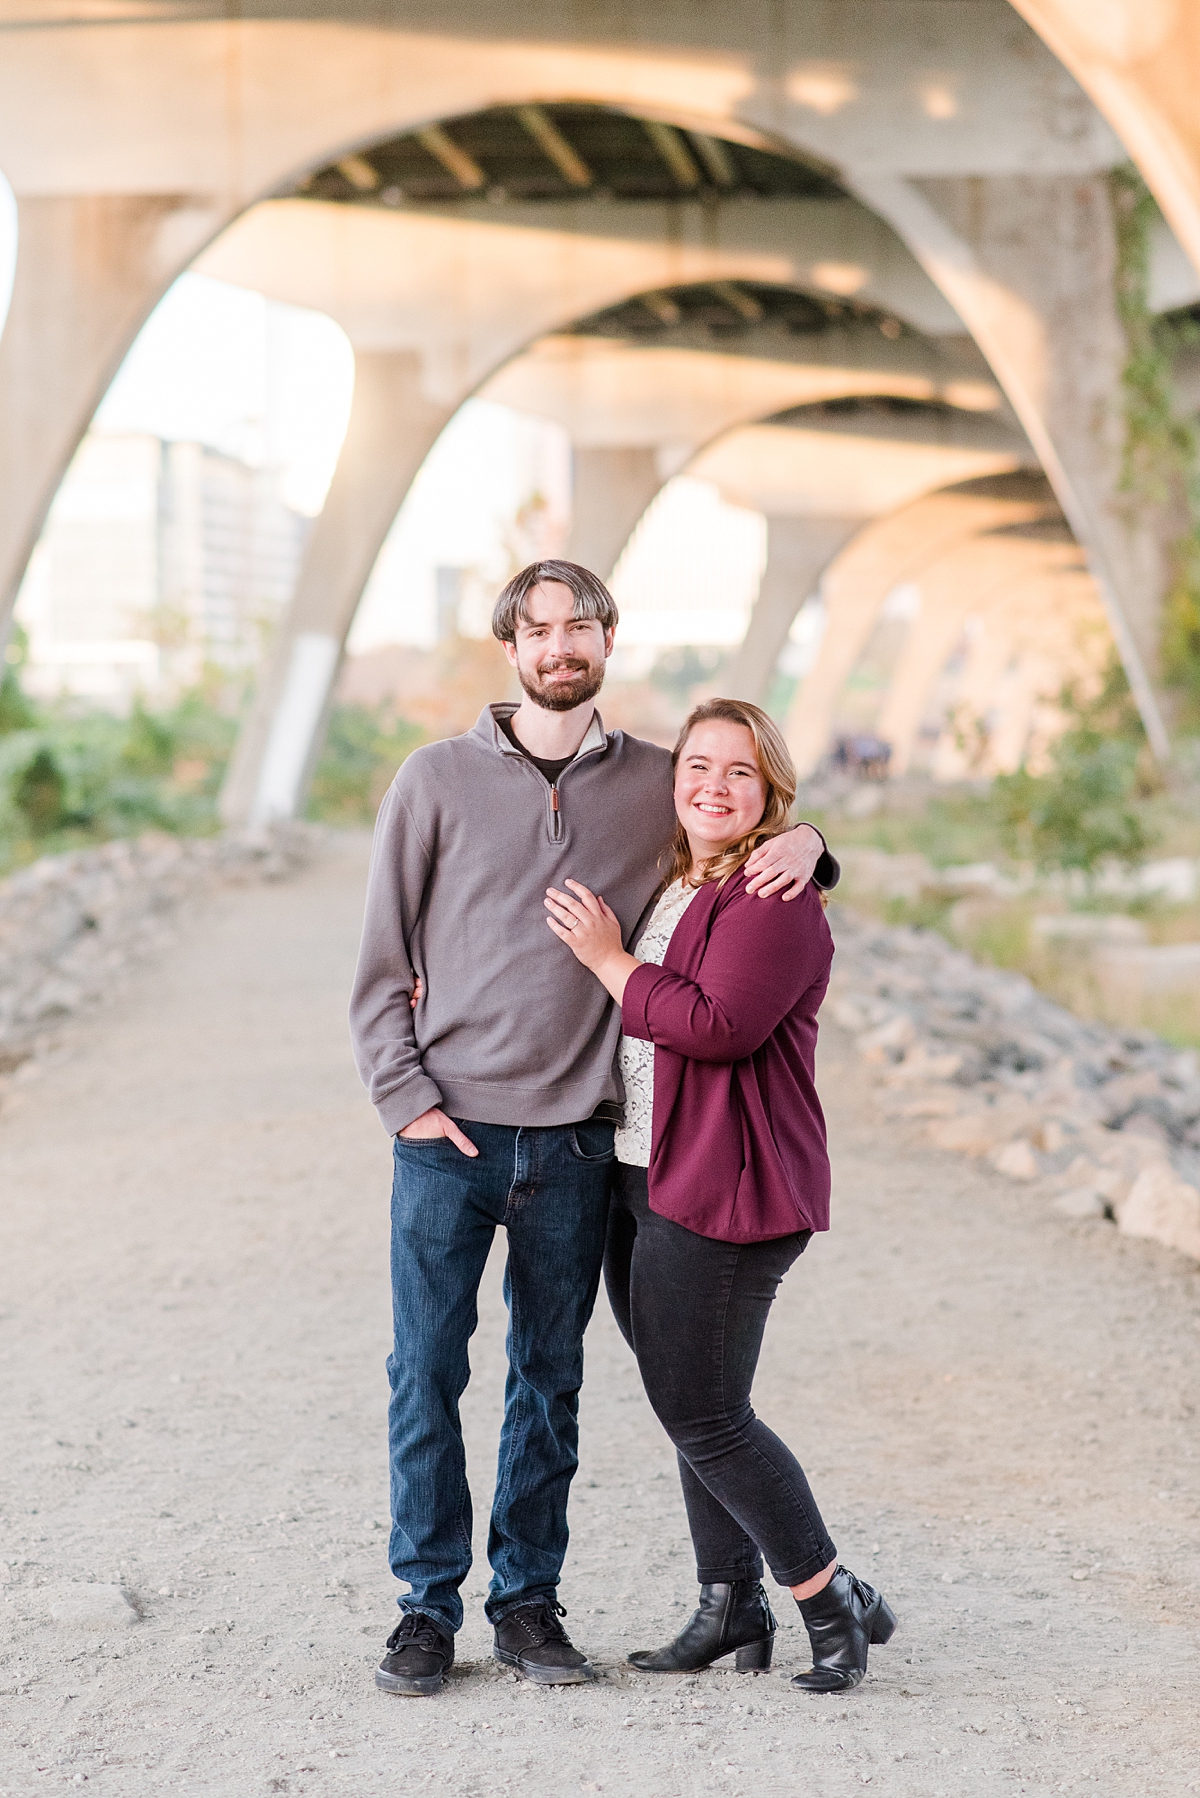 Downtown Richmond James River Engagement Session at the Manchester Climbing Wall Access. Engagement Photography by Virginia Wedding Photographer Kailey Brianne Photographer. 